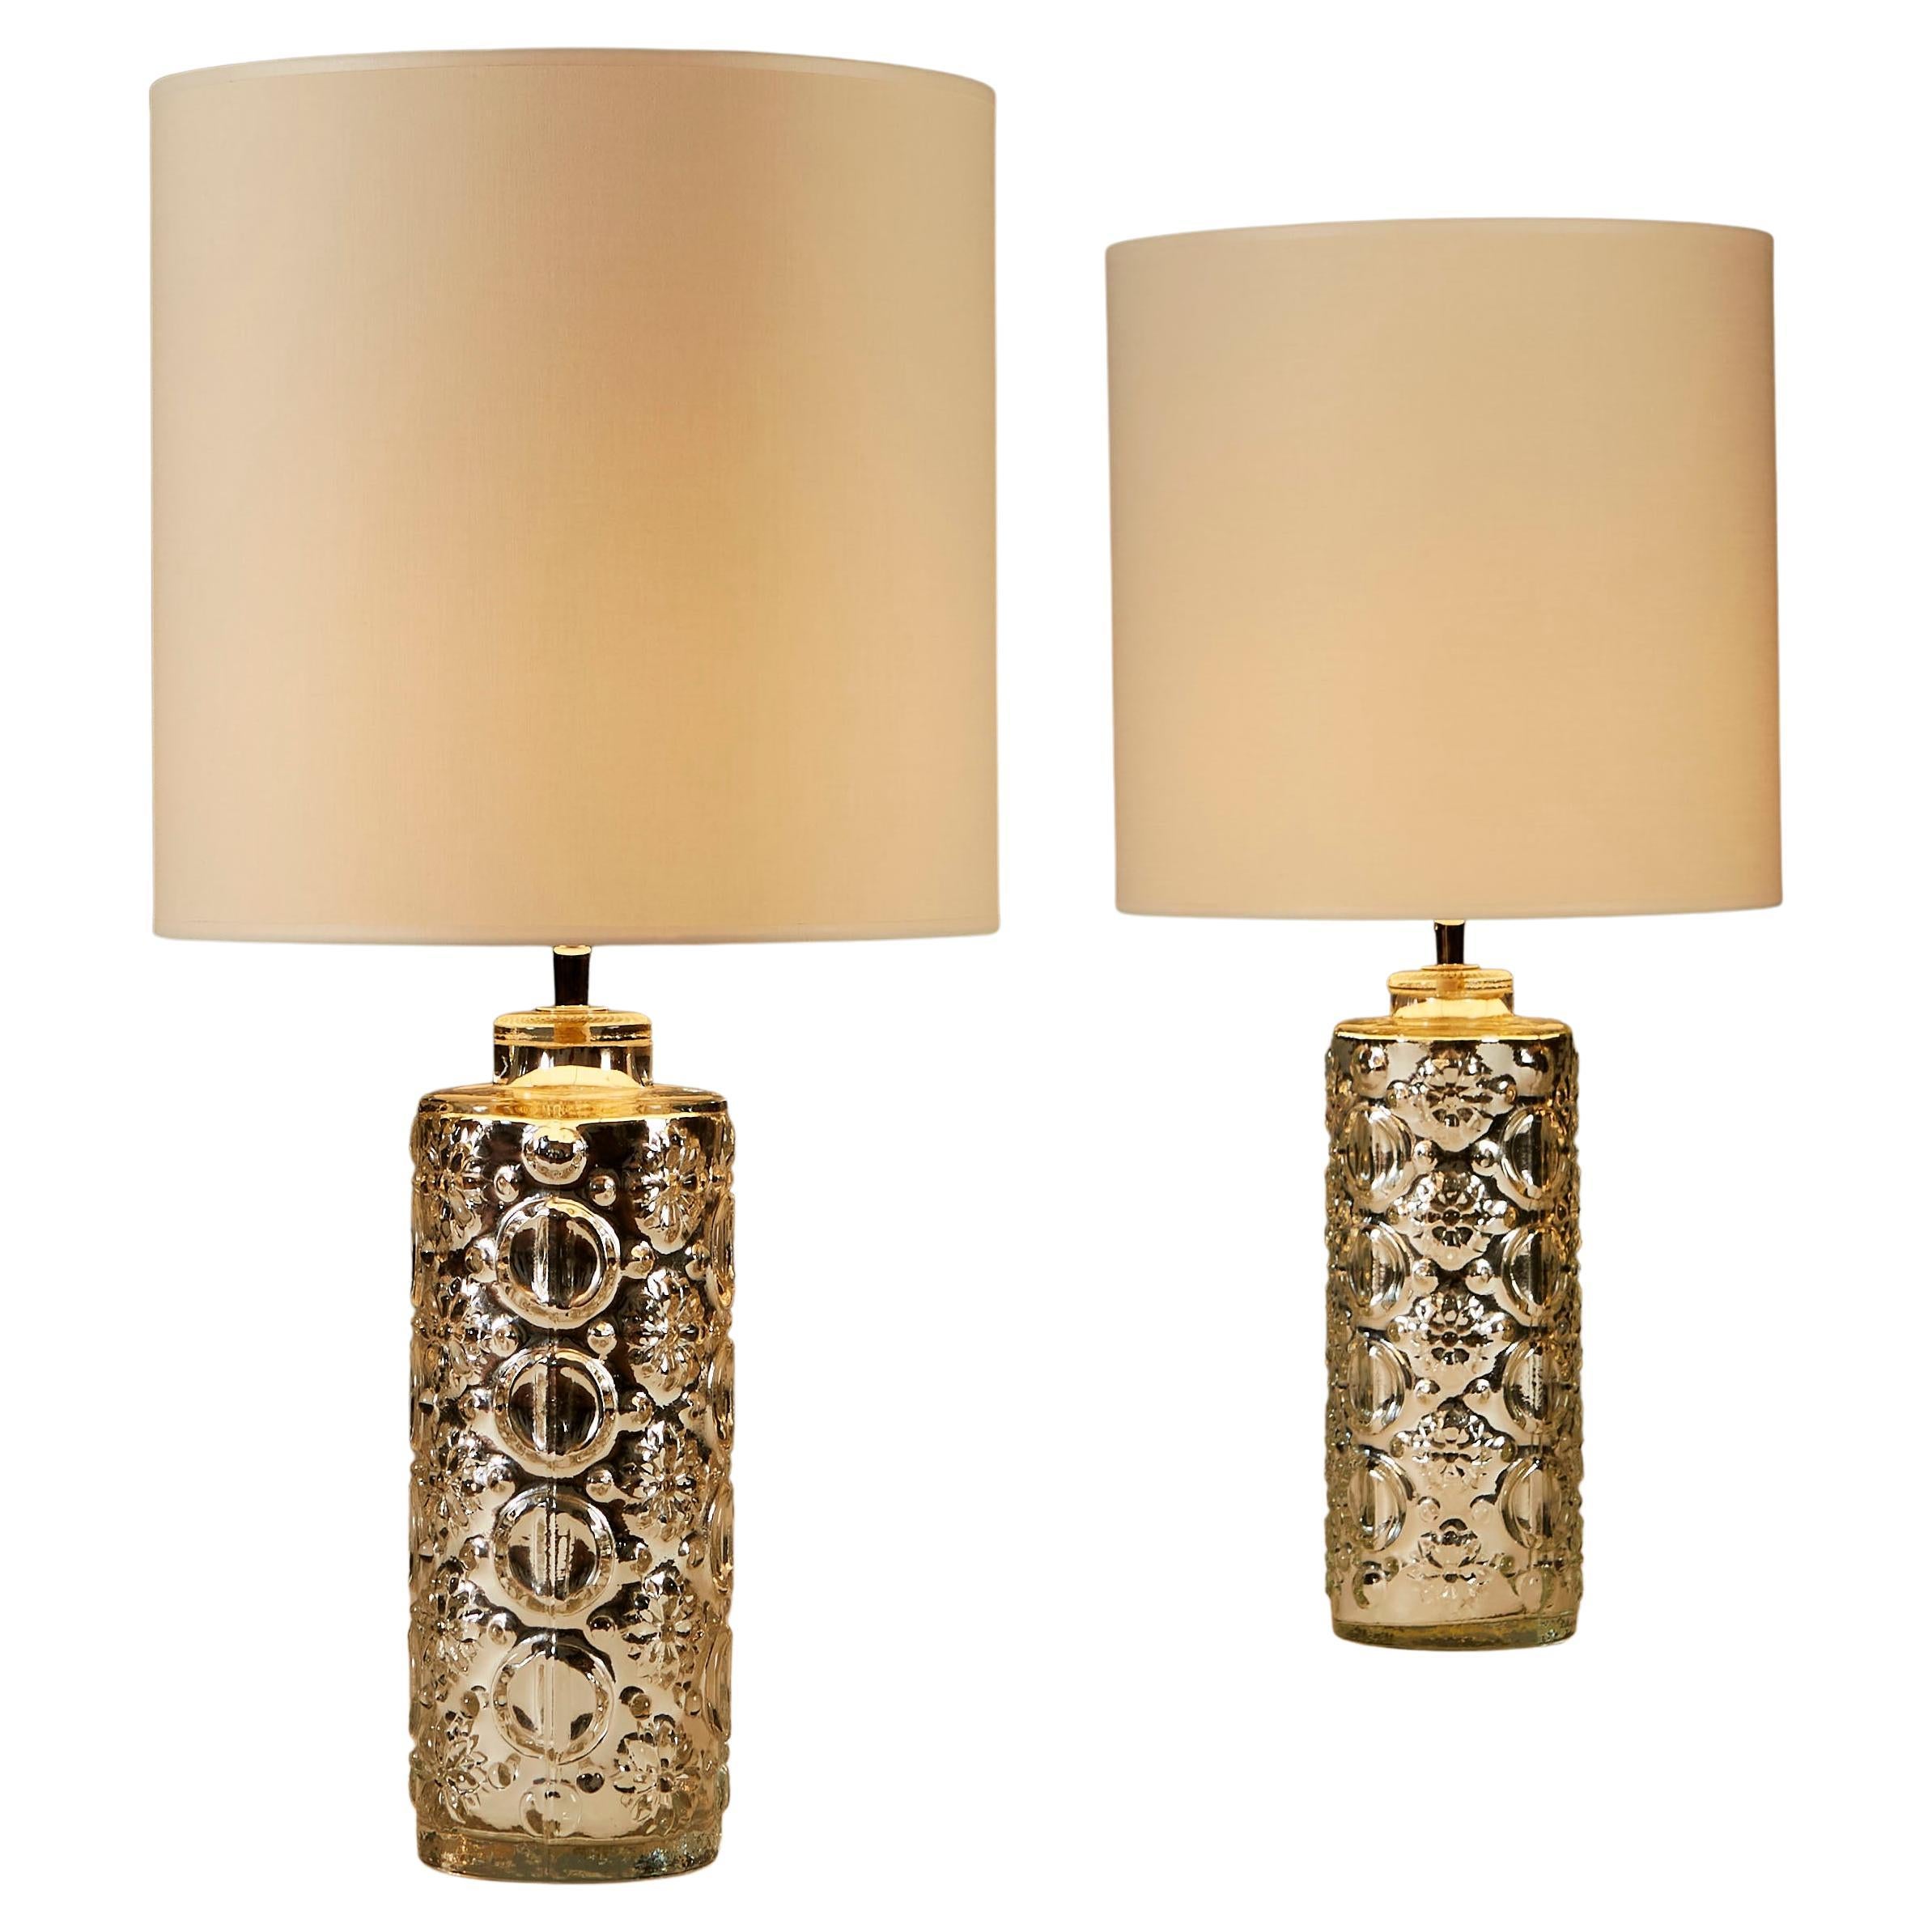 Pair of 20th Century Orrefors Silver Art Glass Table Lamps